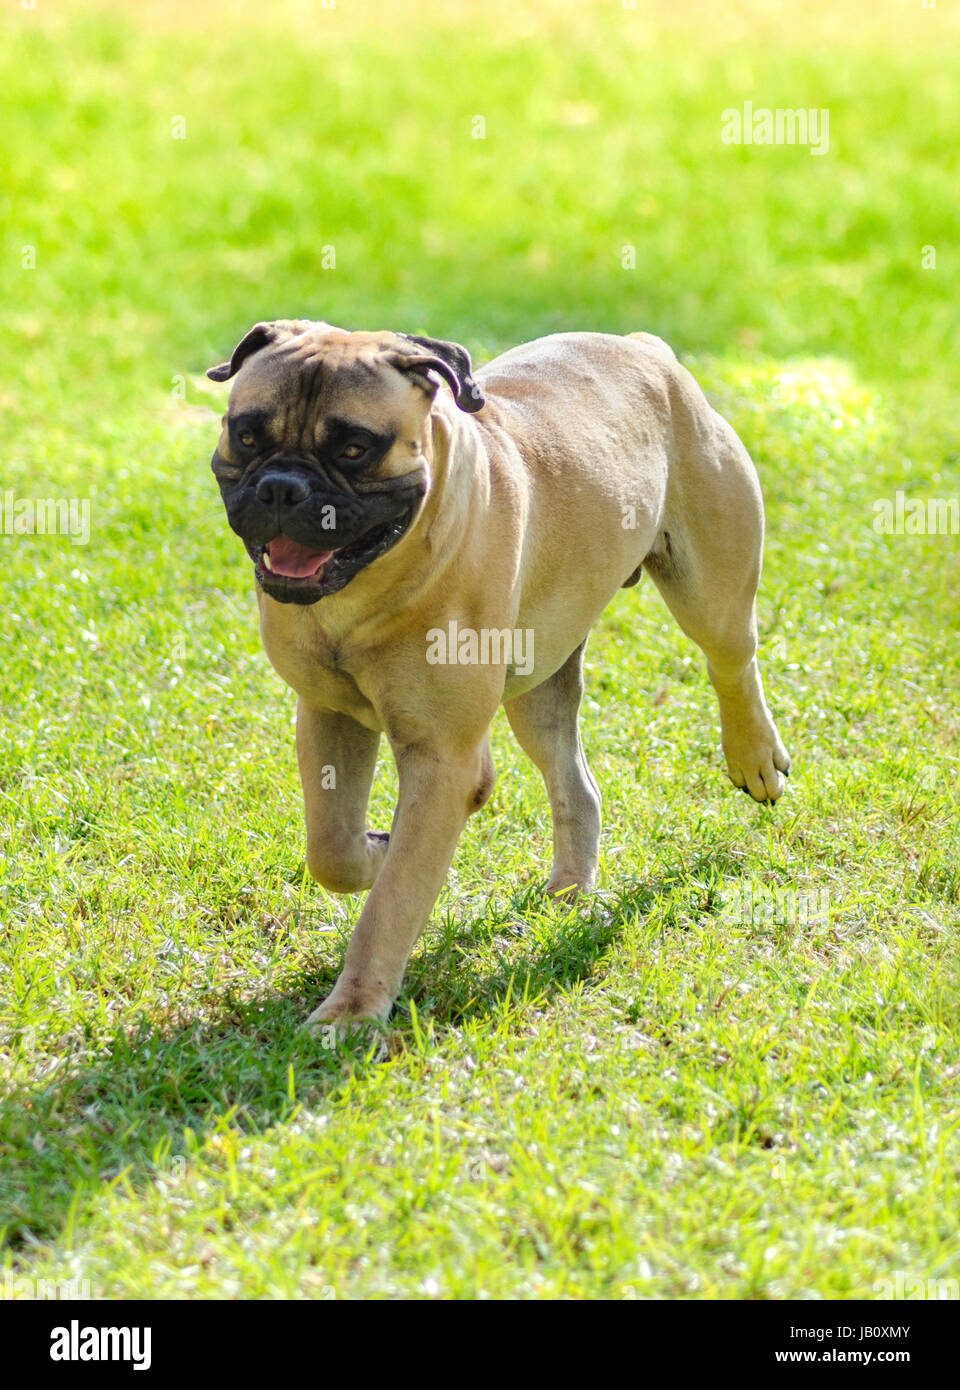 A young, beautiful red fawn, medium sized Bullmastiff dog walking on the grass. The Bullmastiff is a powerfully built animal with great intelligence and a willingness to please. Stock Photo